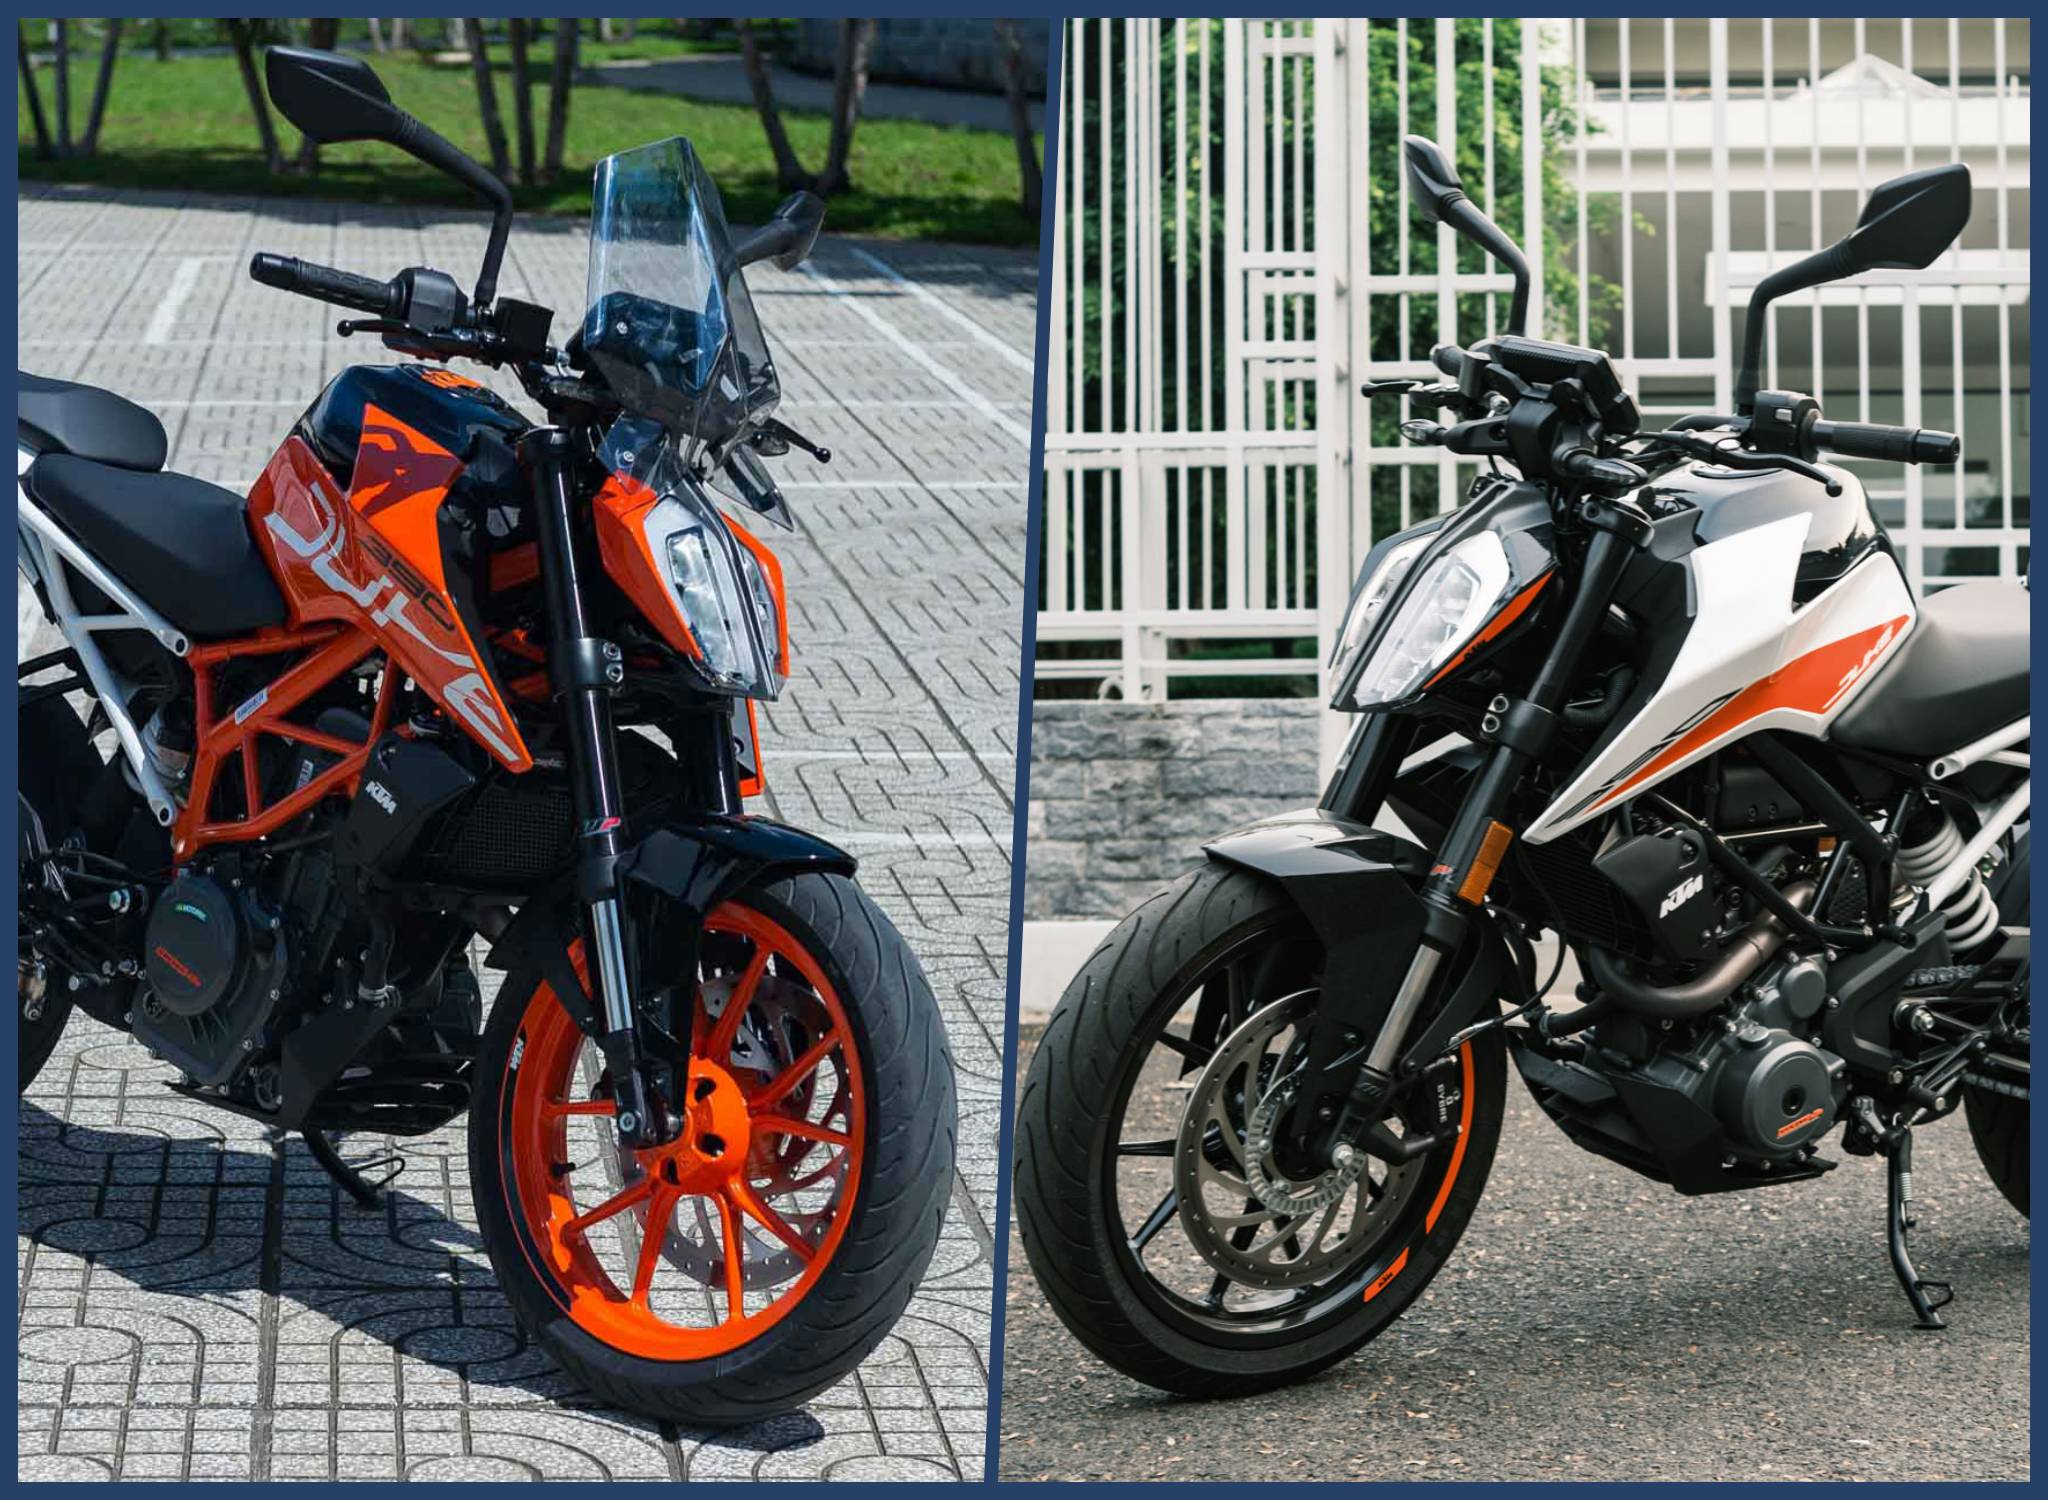 KTM 390 DUKE  Price Colors Images Specifications